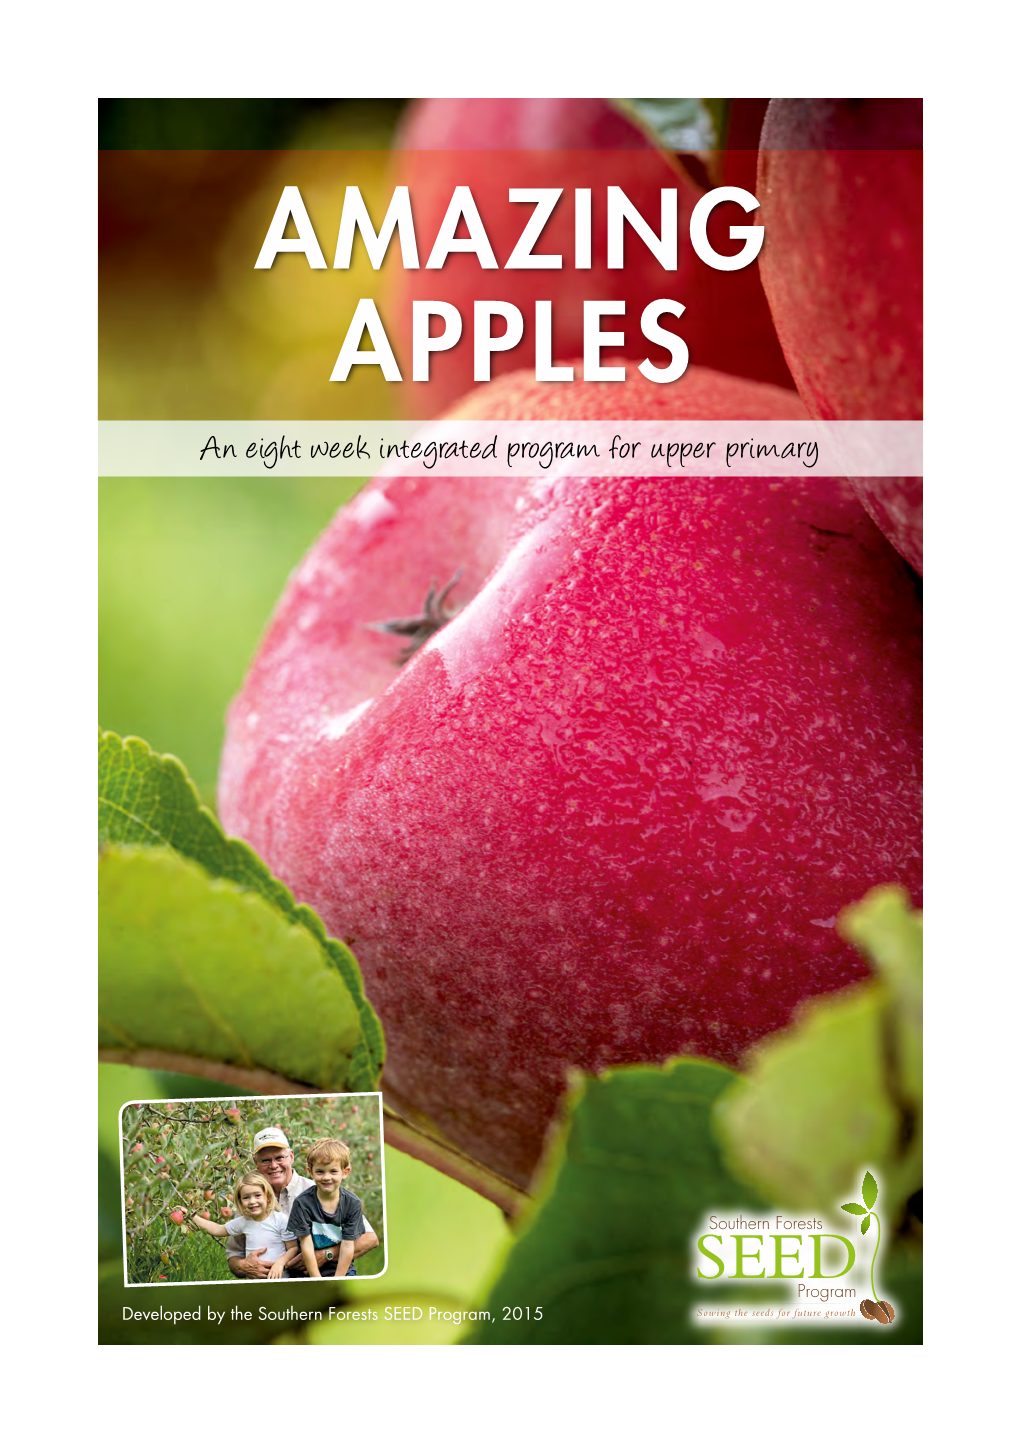 AMAZING APPLES an Eight Week Integrated Program for Upper Primary